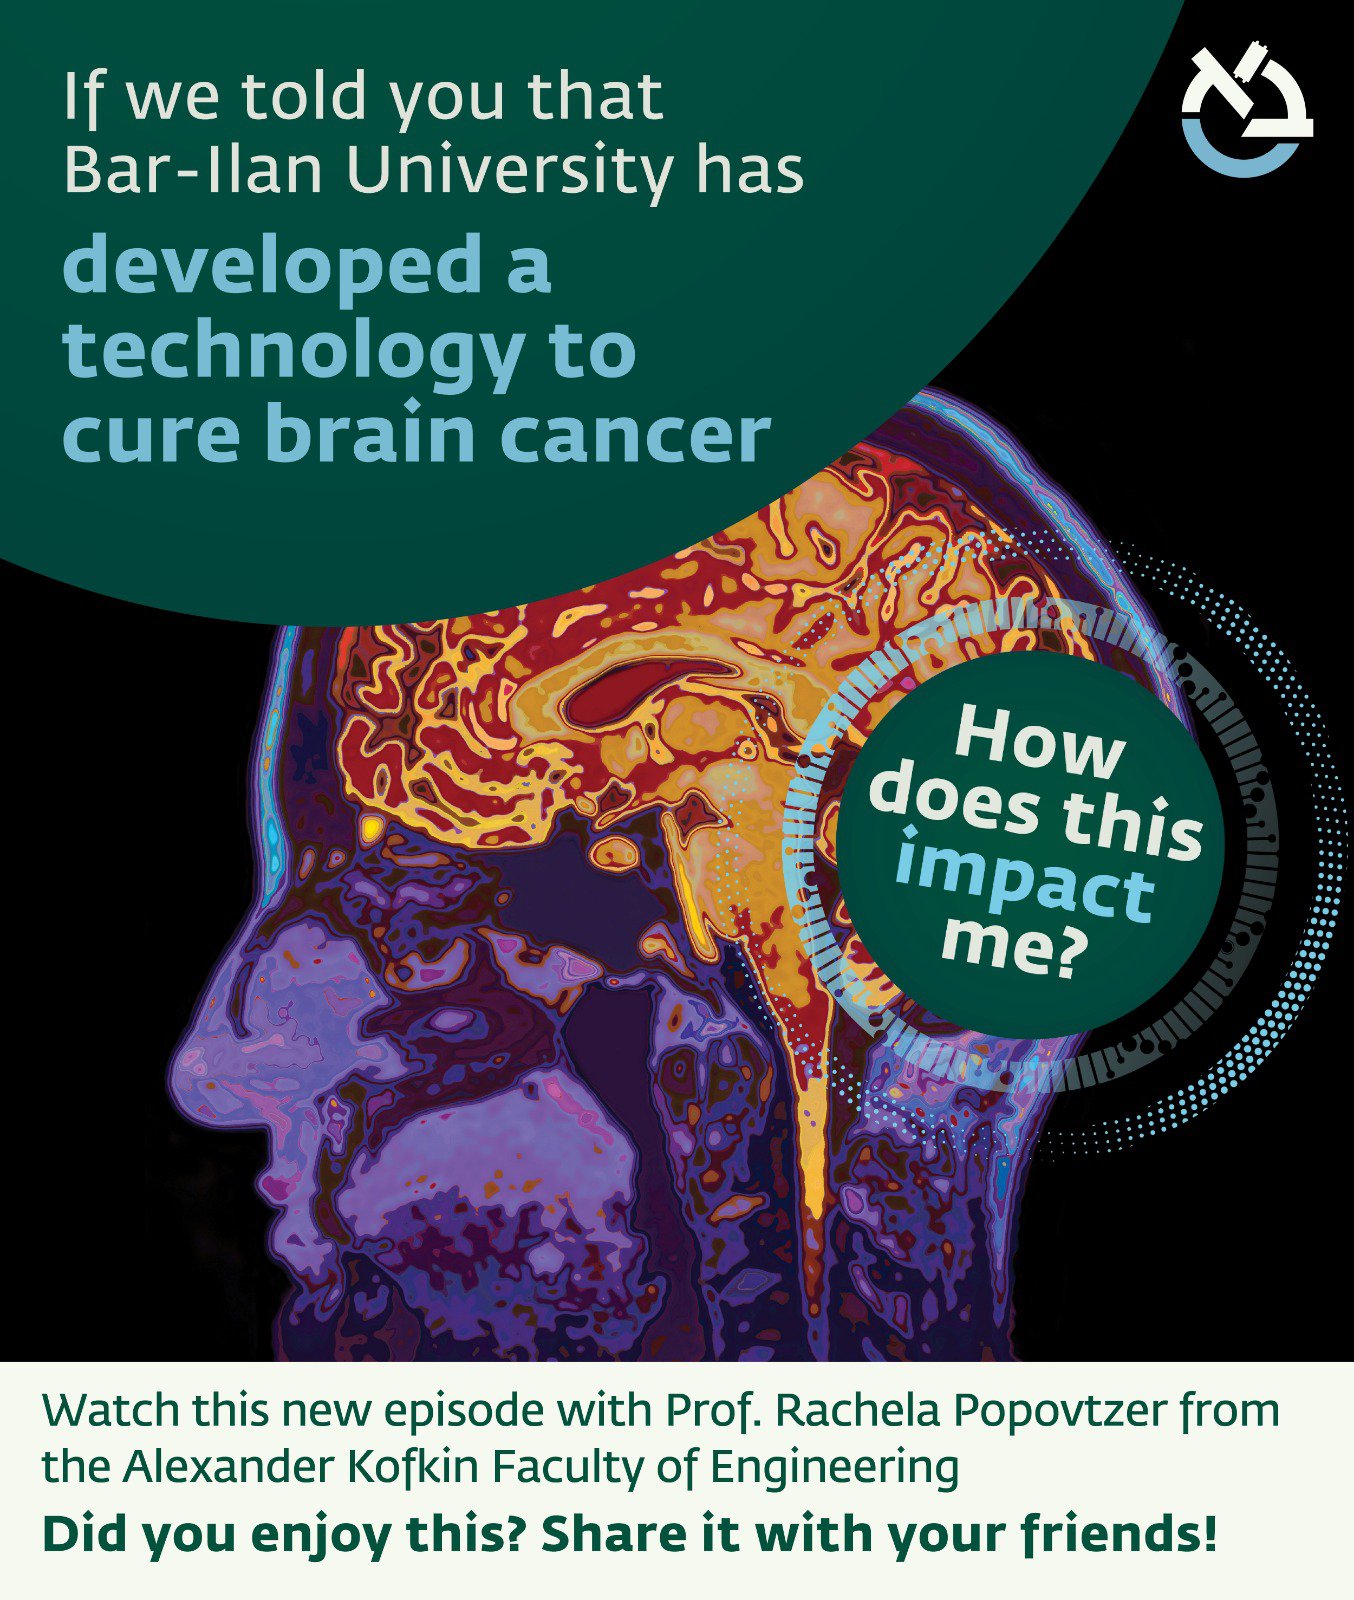 Our lab was delighted to participate in an episode of "How Does This Impact Me?", and share the research done in our lab on nanomedicine for brain disease. 

Watch here: https://www.youtube.com/watch?v=x-Bja4DLUIw
Or click on the link below!